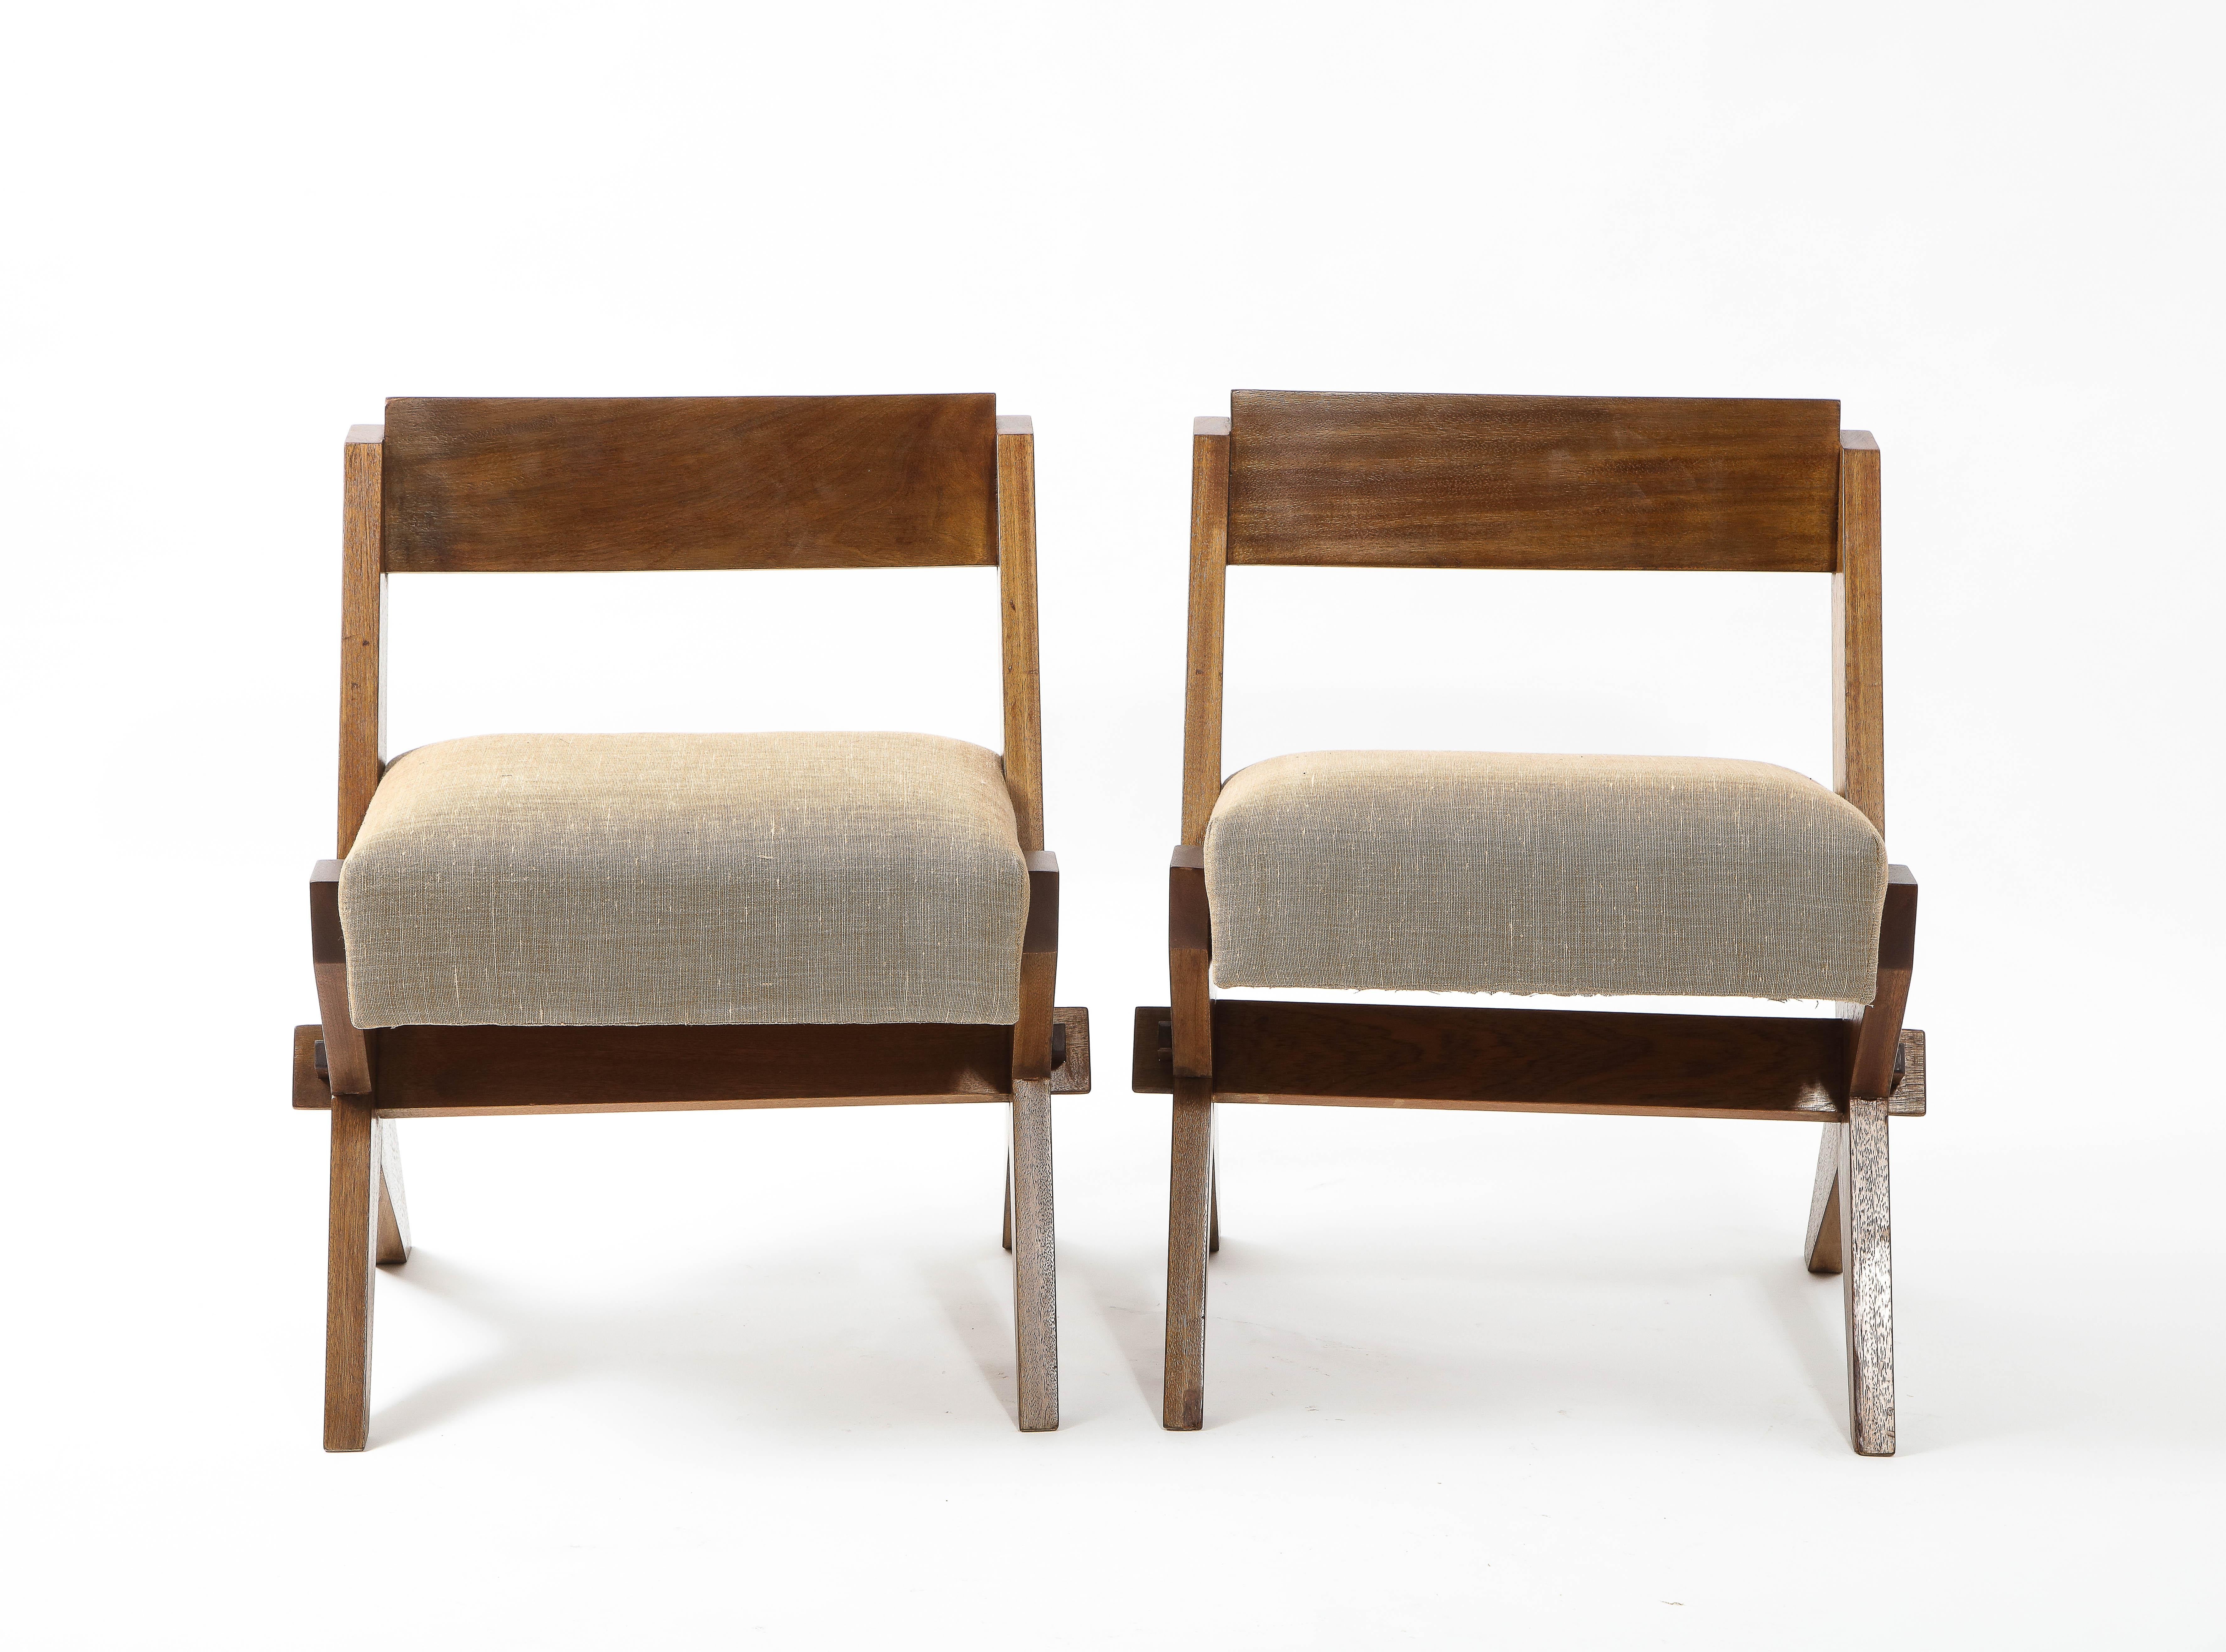 Solidly constructed walnut side chairs in the style of Jeanneret, of note, are the 